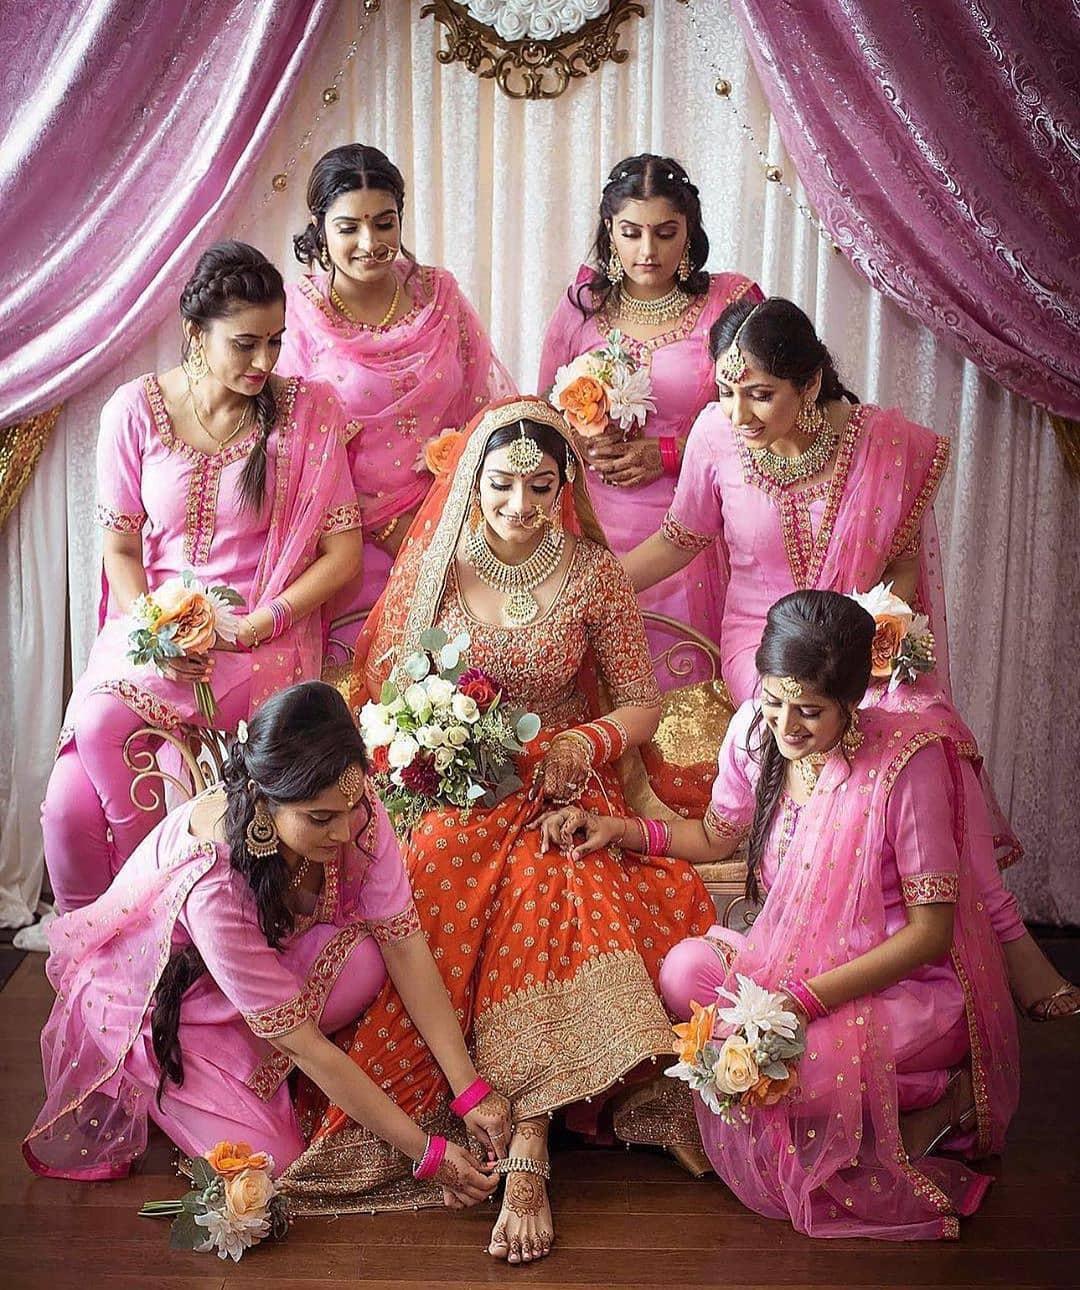 Indian Family Photos Any Wedding Album is Incomplete Without